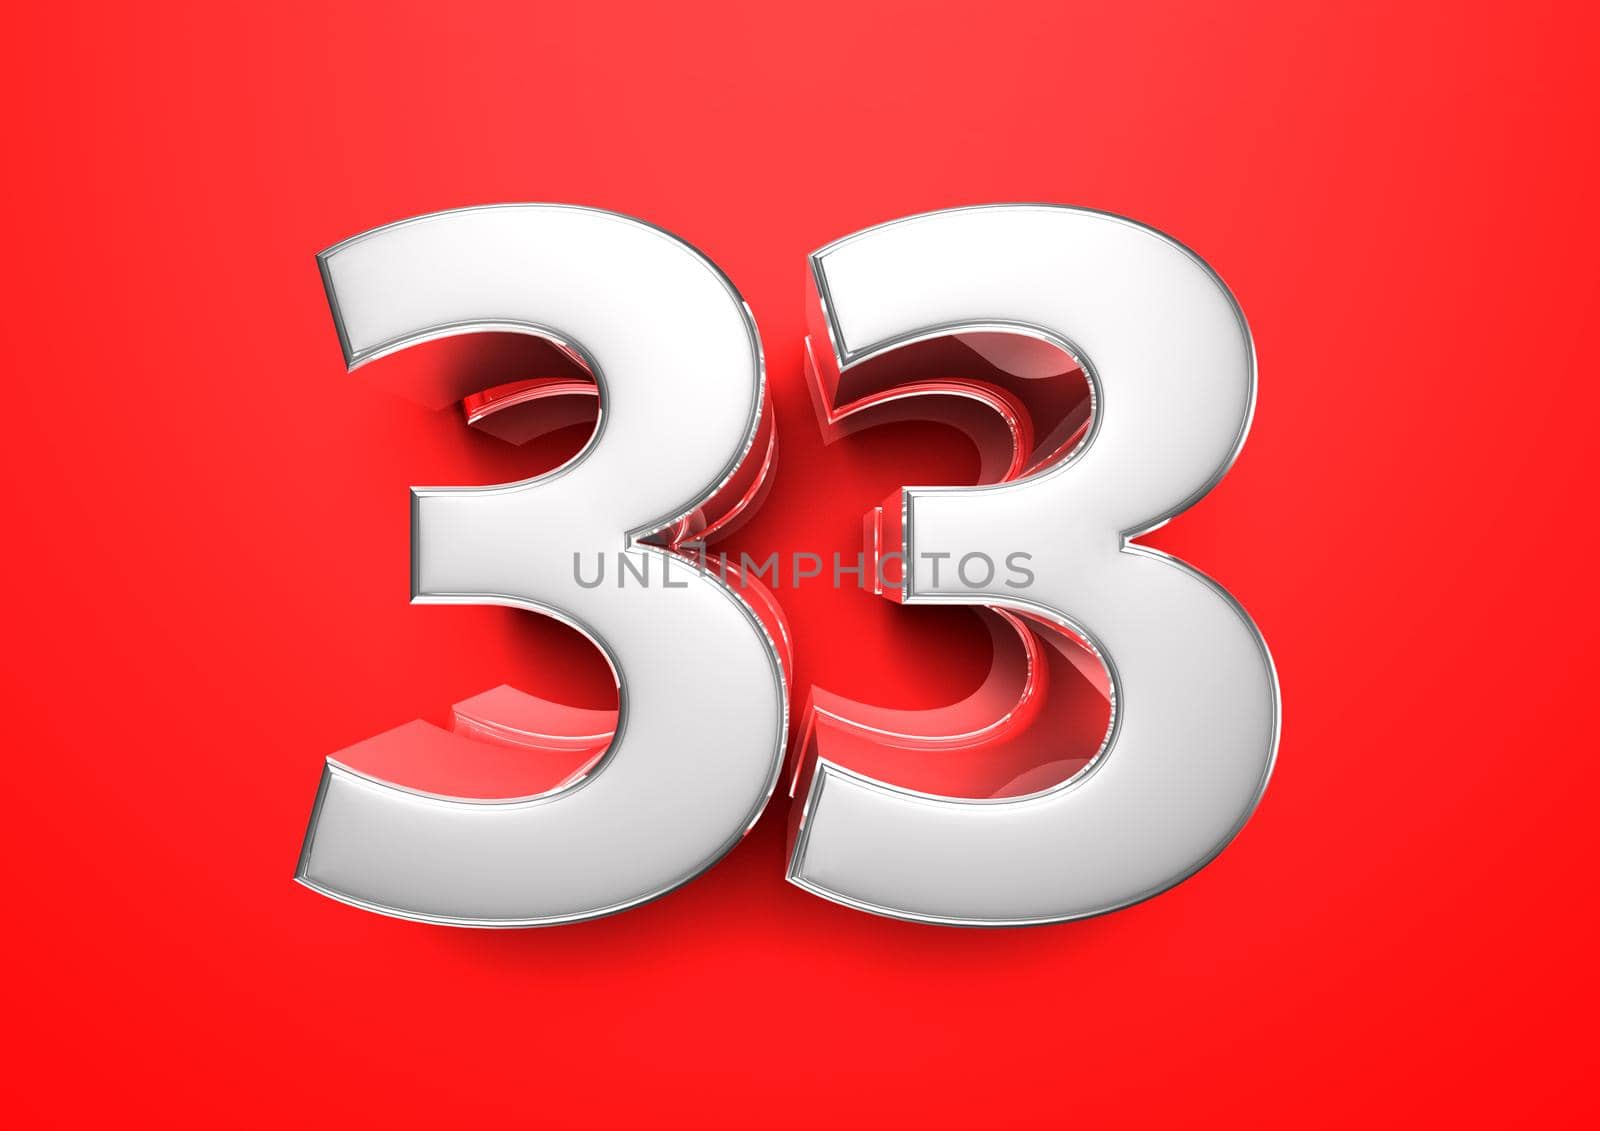 Price tag 33. Anniversary 33. Number 33 3D illustration on a red background.